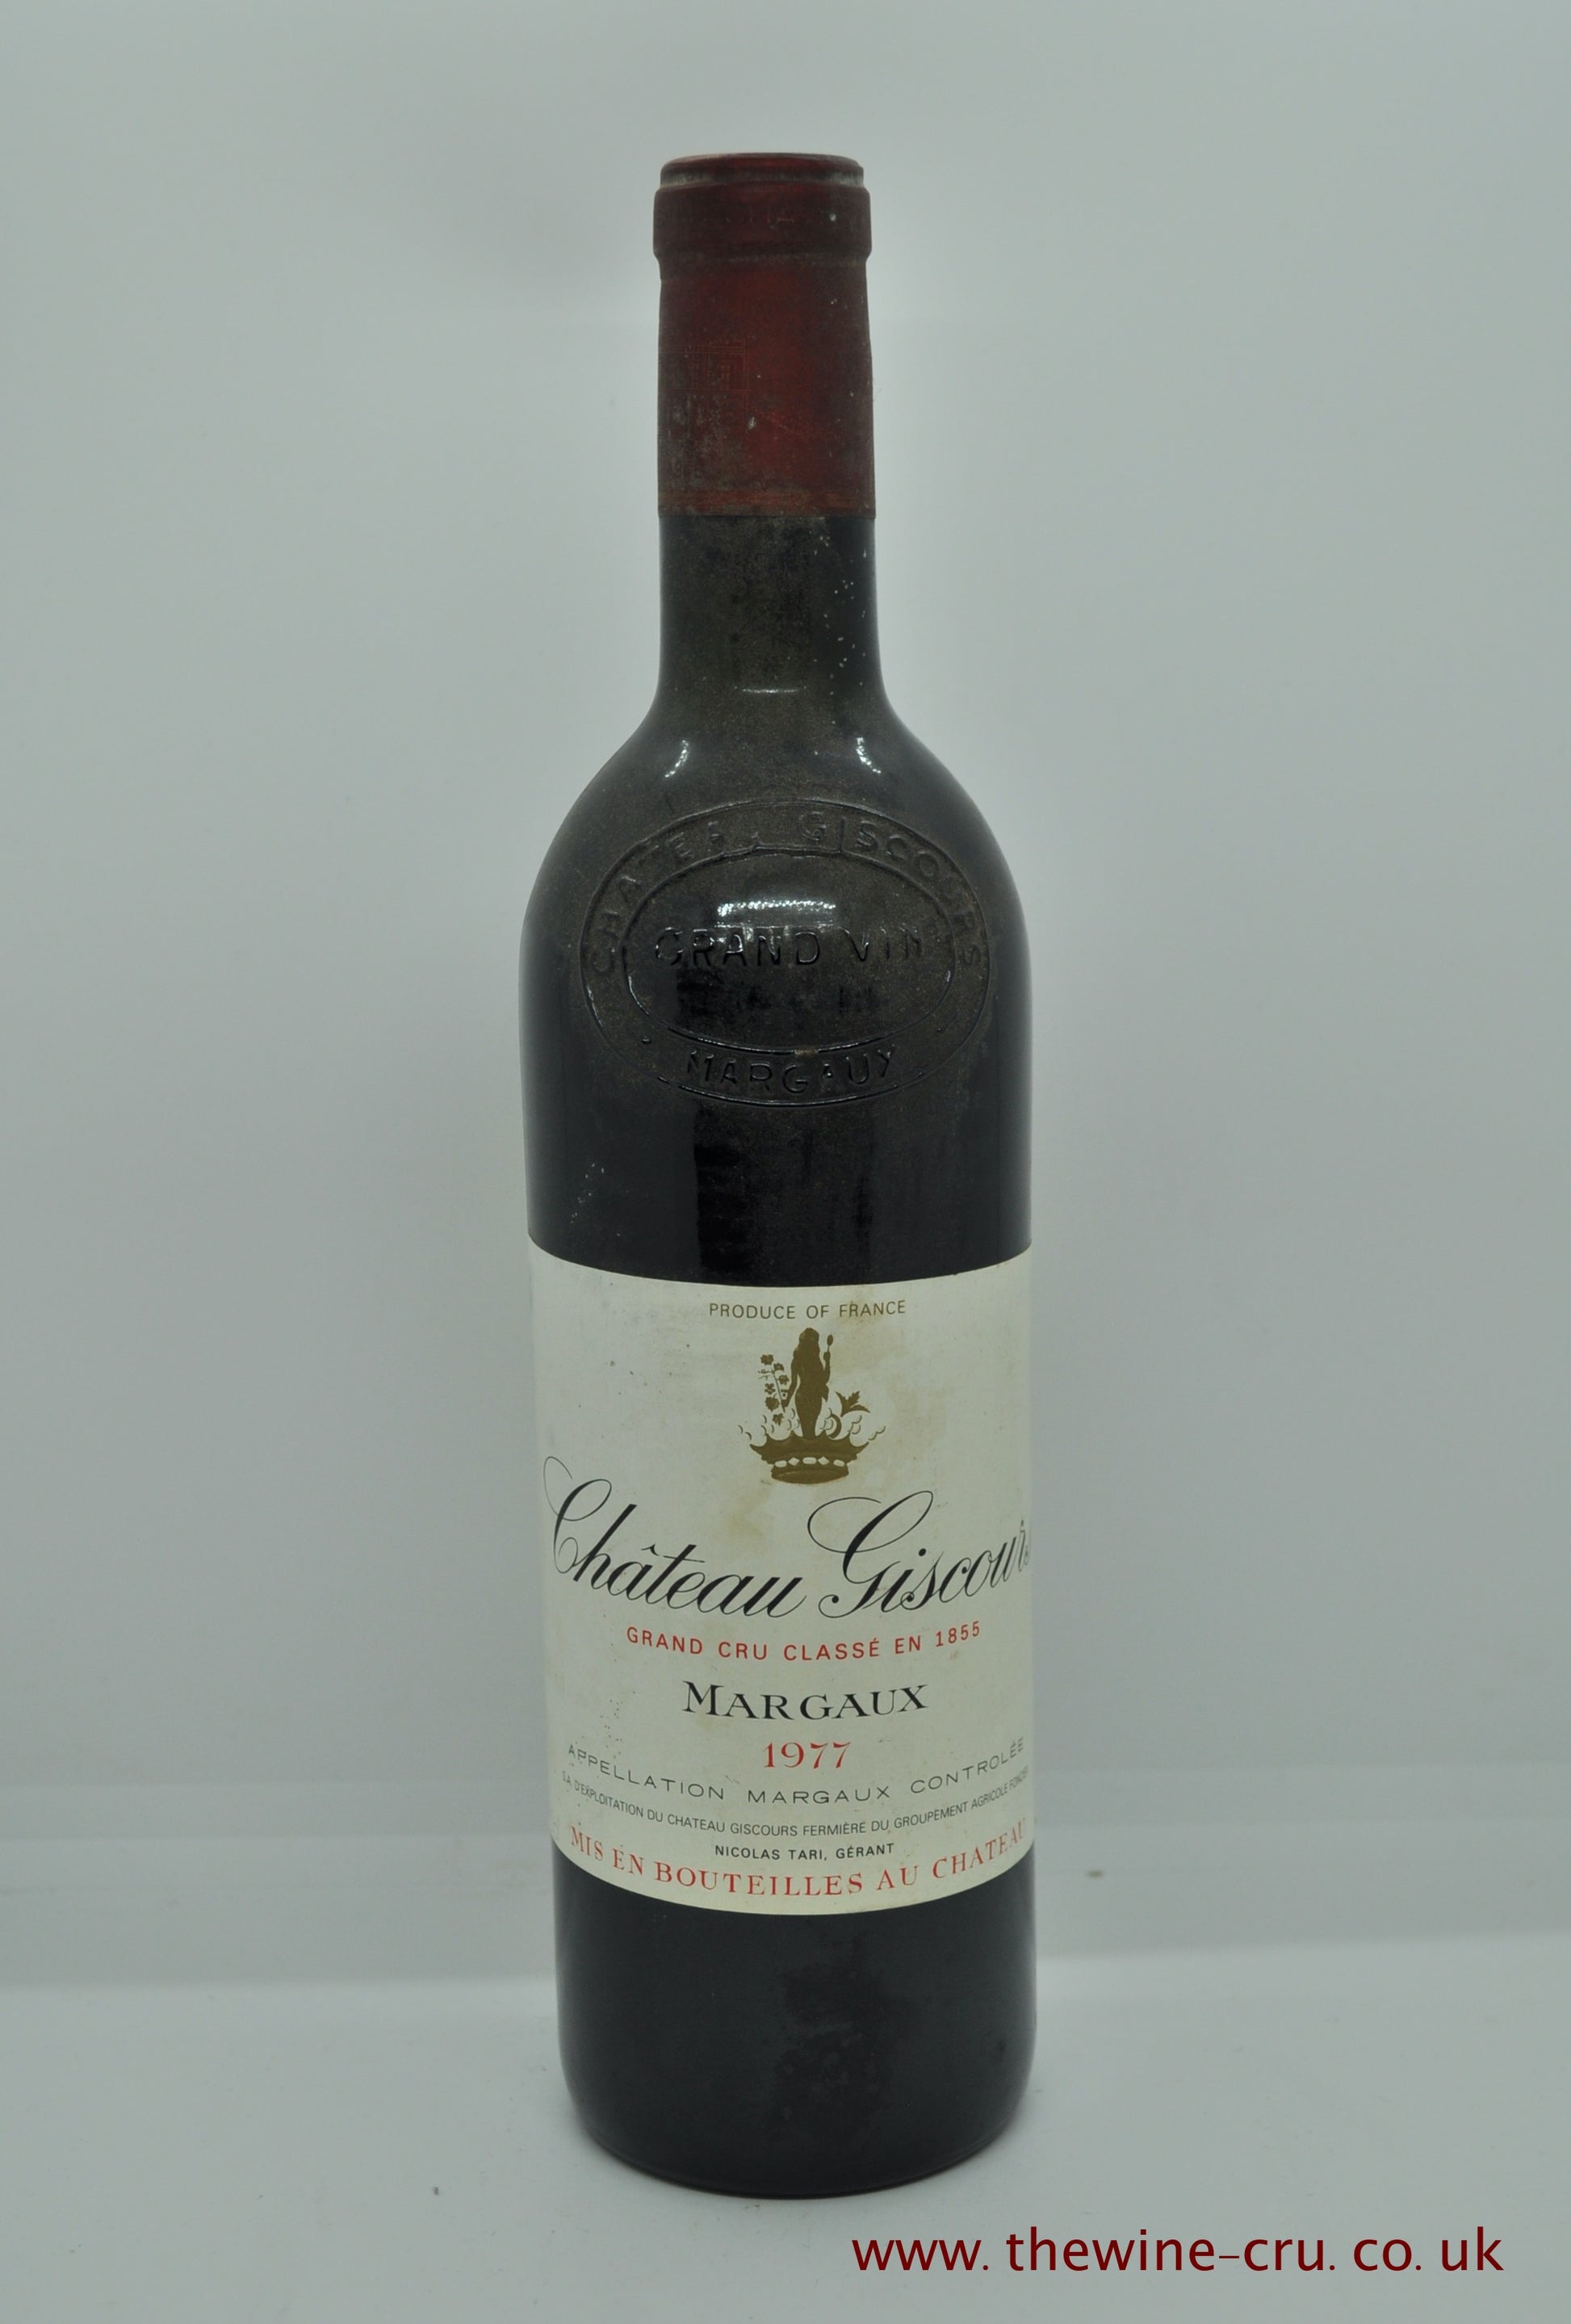 1977 vintage red wine. Chateau Giscours 1977. France, Bordeaux. Immediate delivery. Free local delivery. Gift wrapping available.